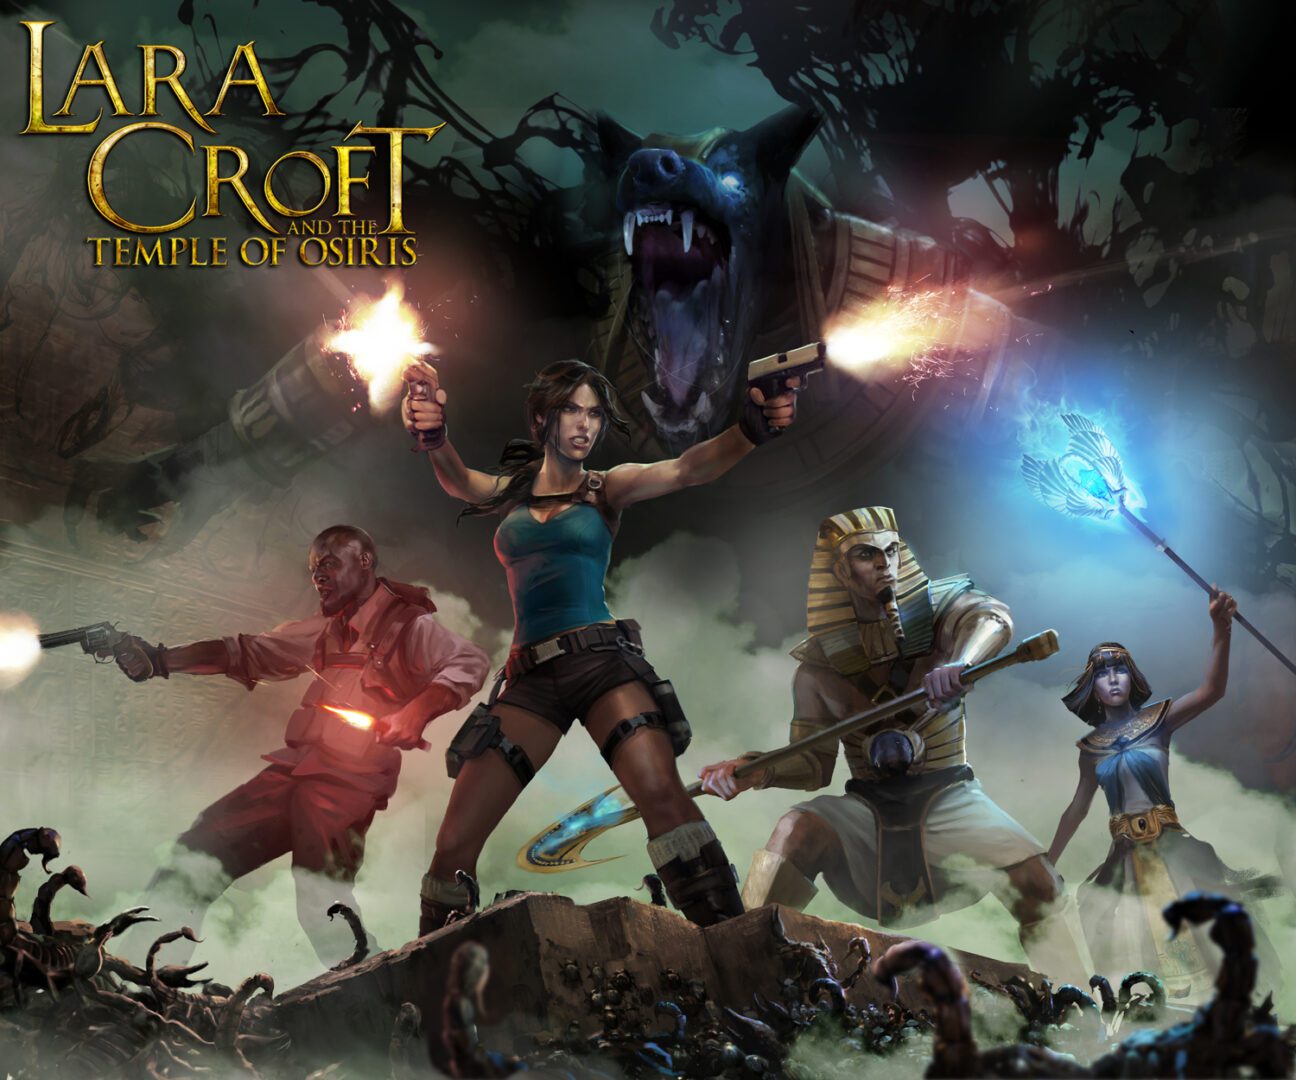 Lara Croft and the Temple of Osiris PAX Prime Hands-On